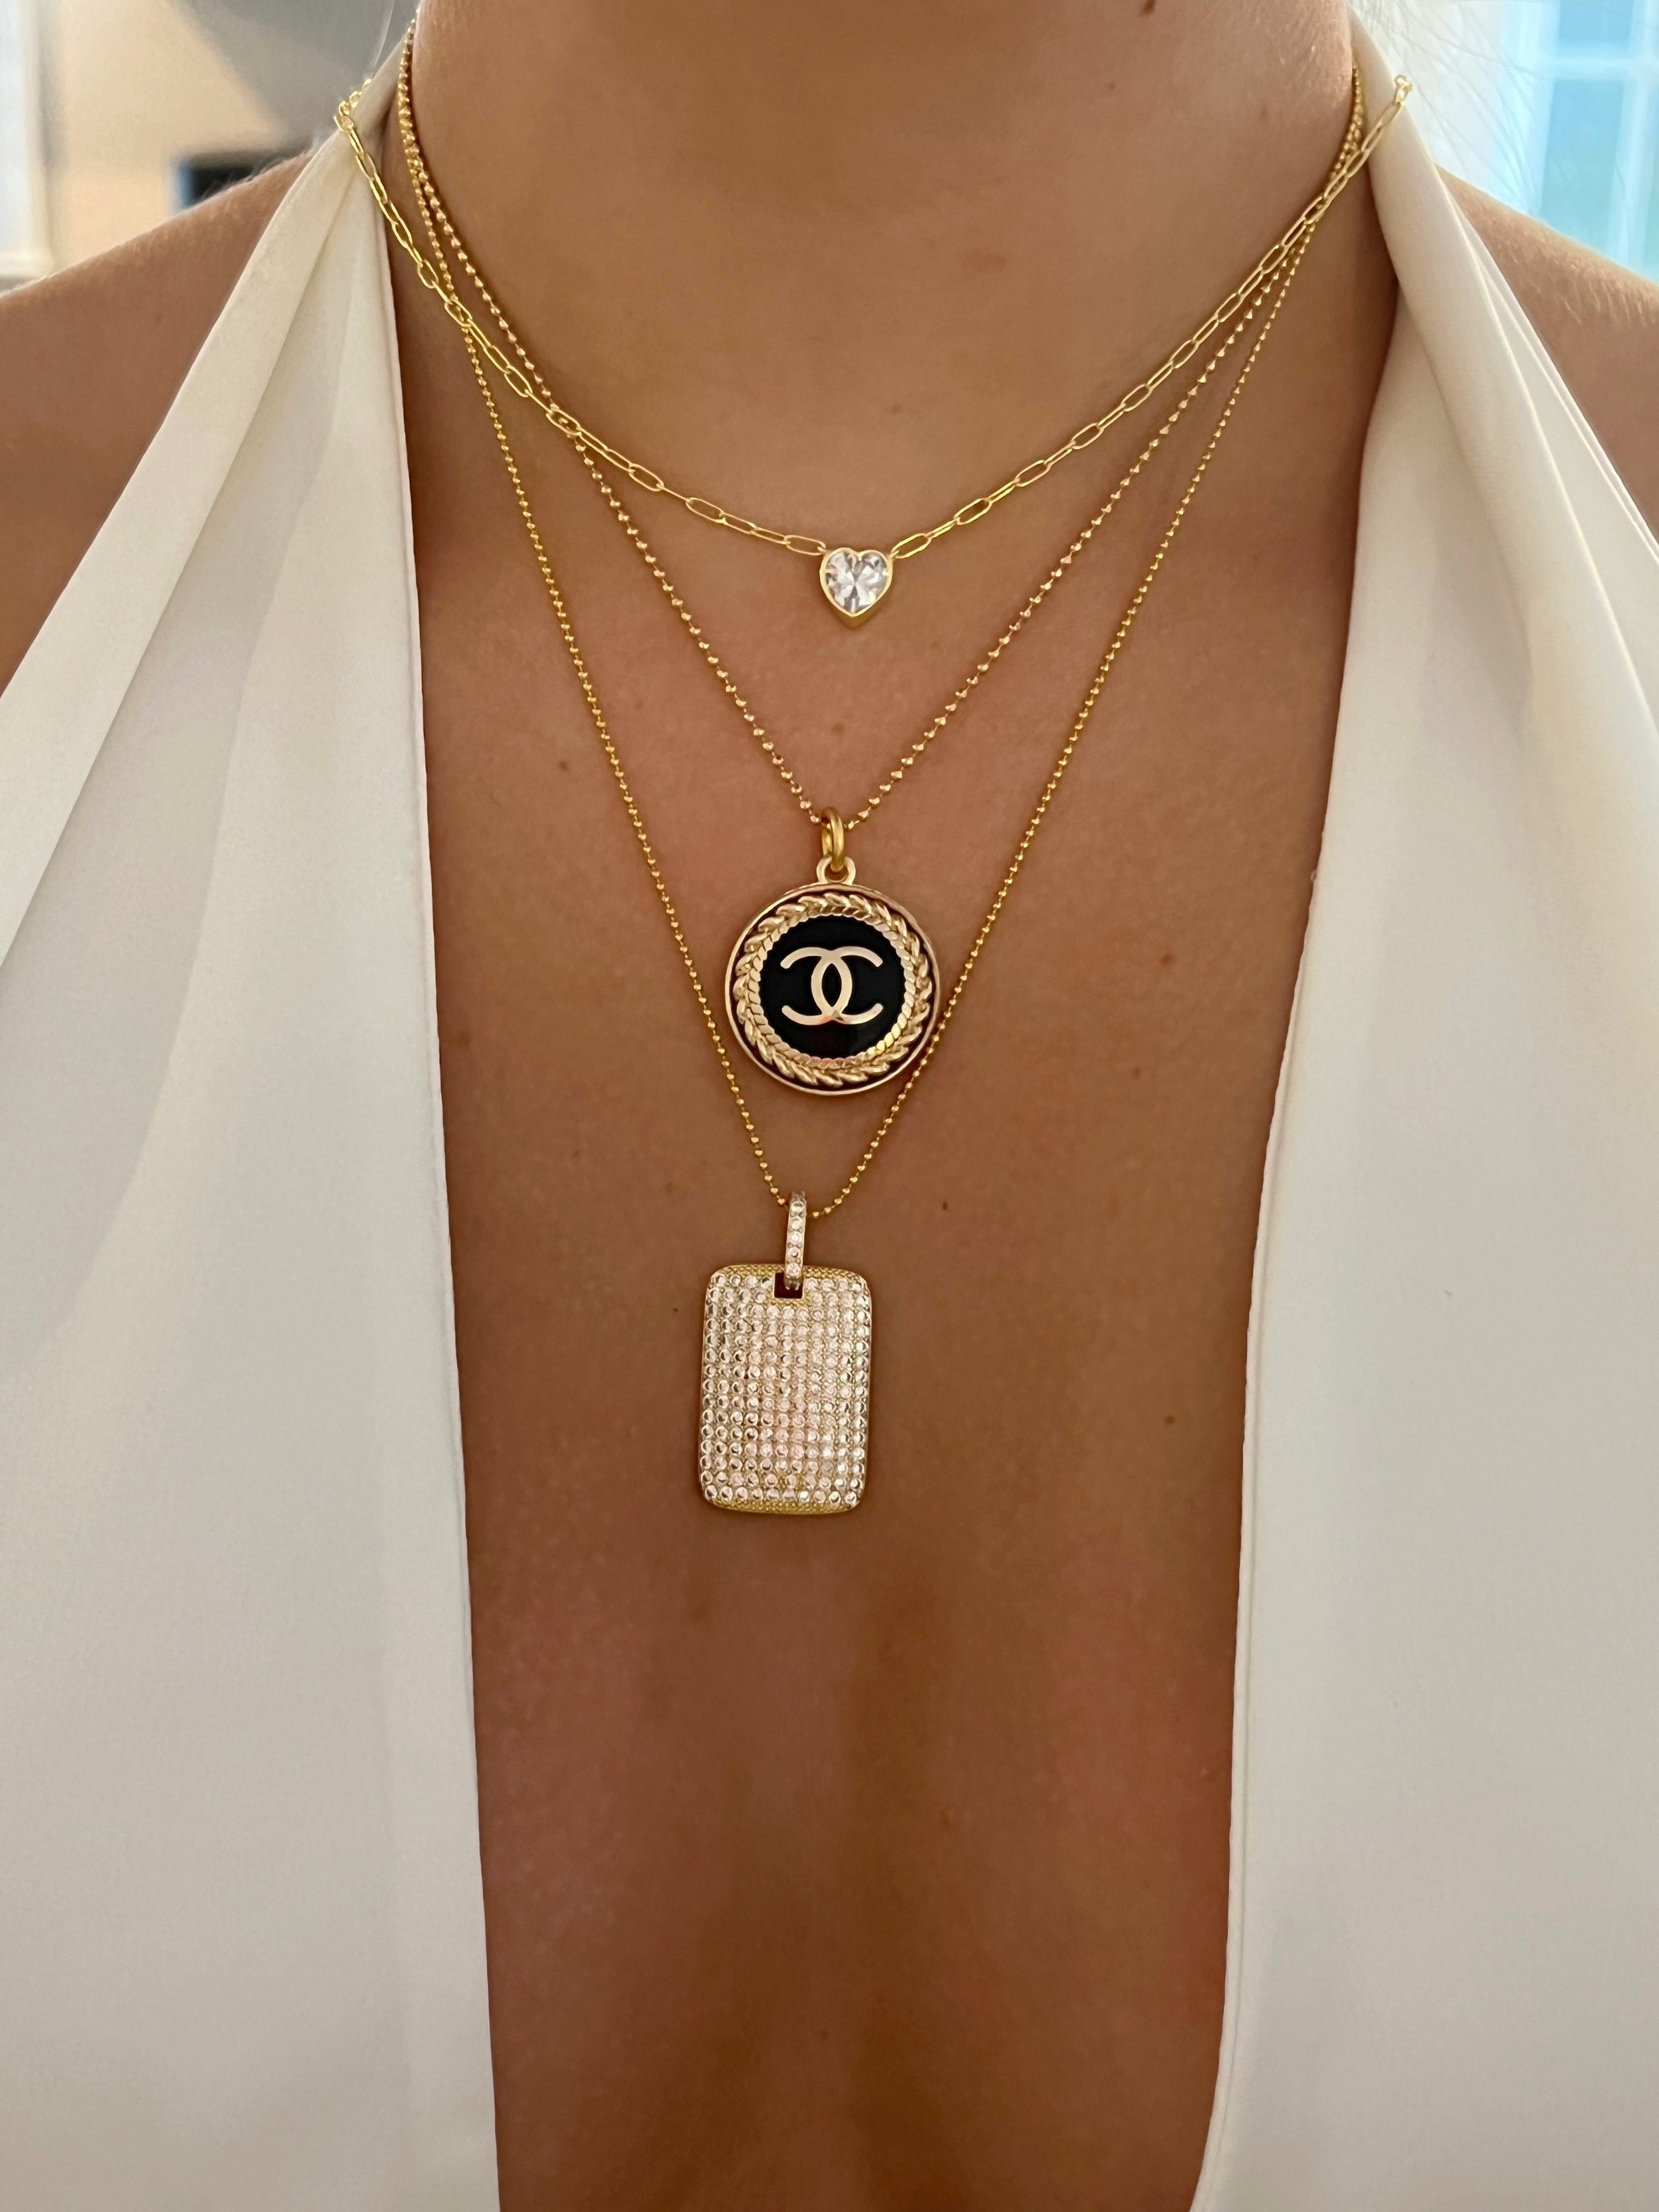 Chanel Button Jewelry